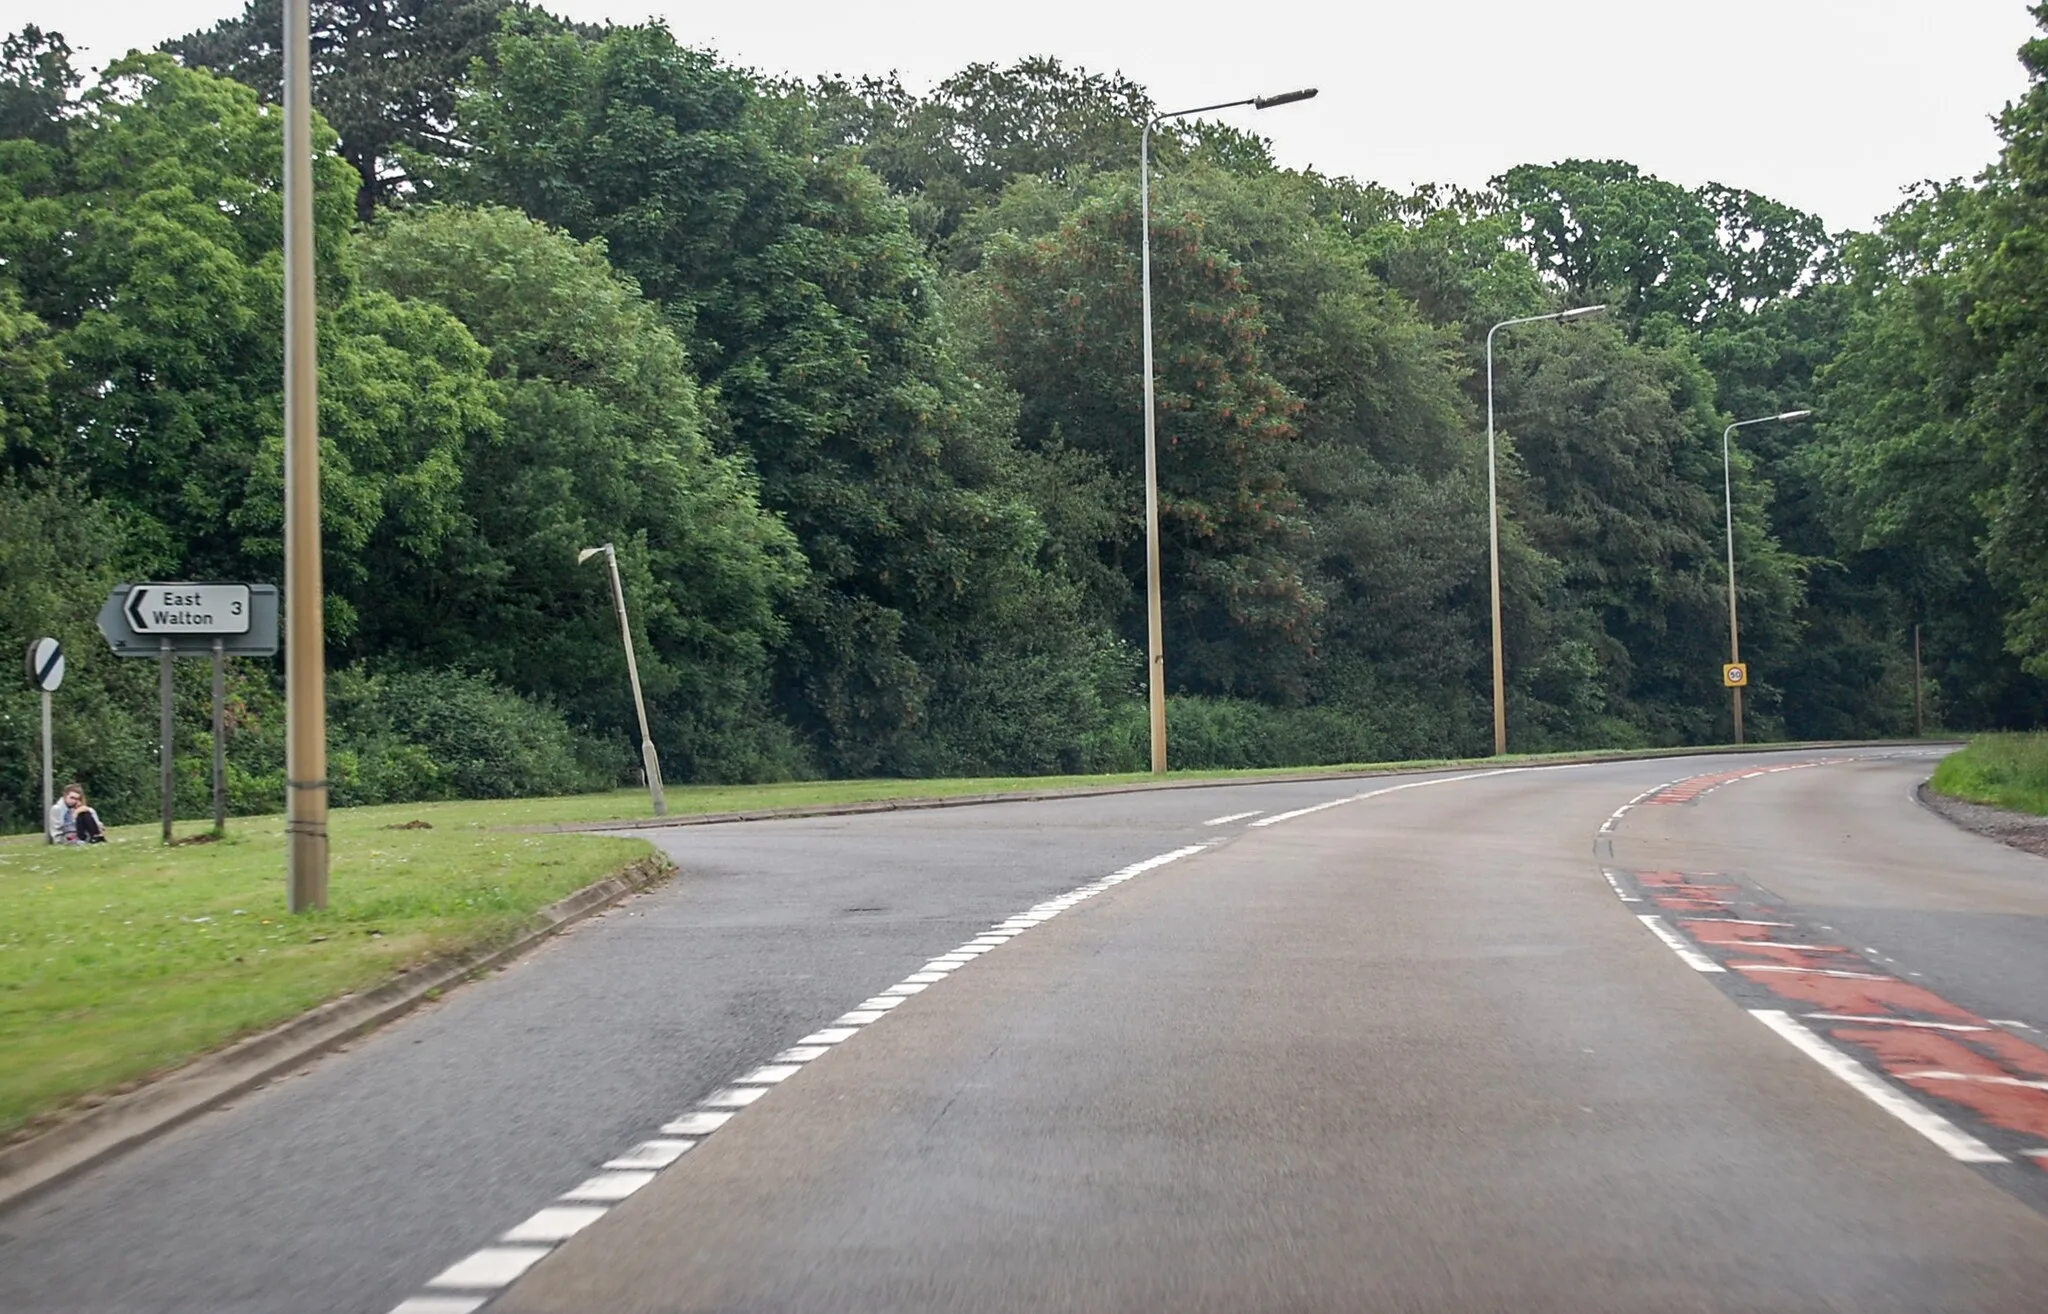 Photo showing: A47 at junction to East Walton